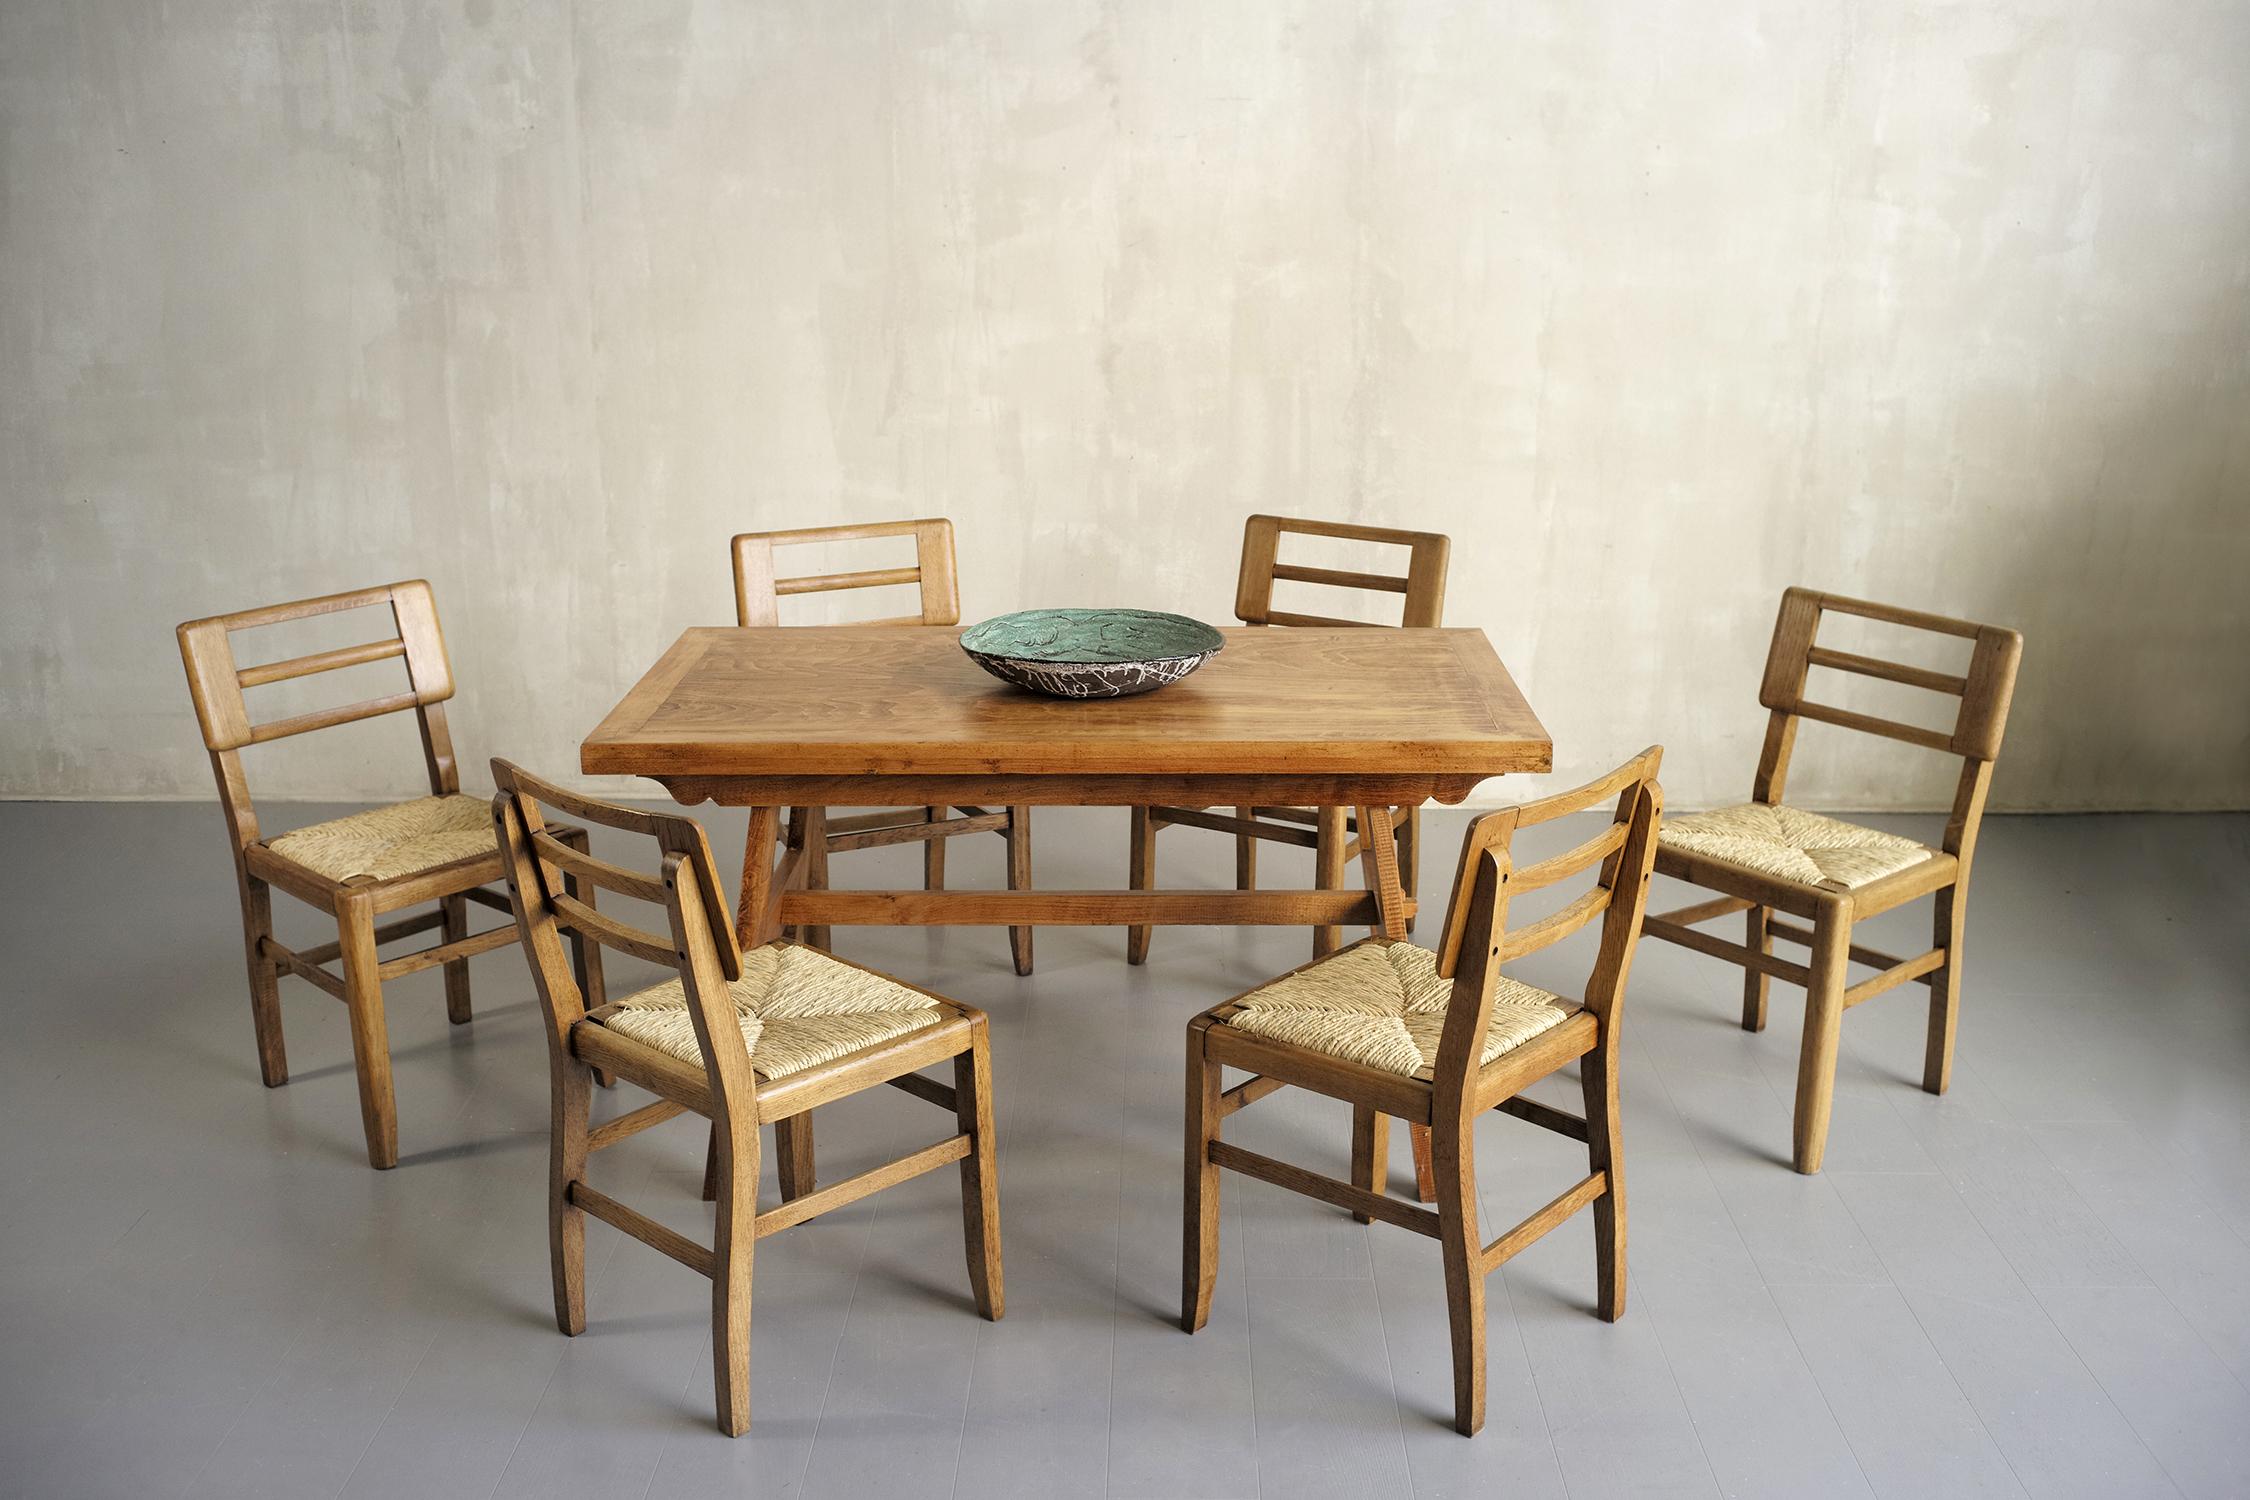 Pierre Cruège, Set of 6 Straw Chairs, France, 1950 For Sale 6